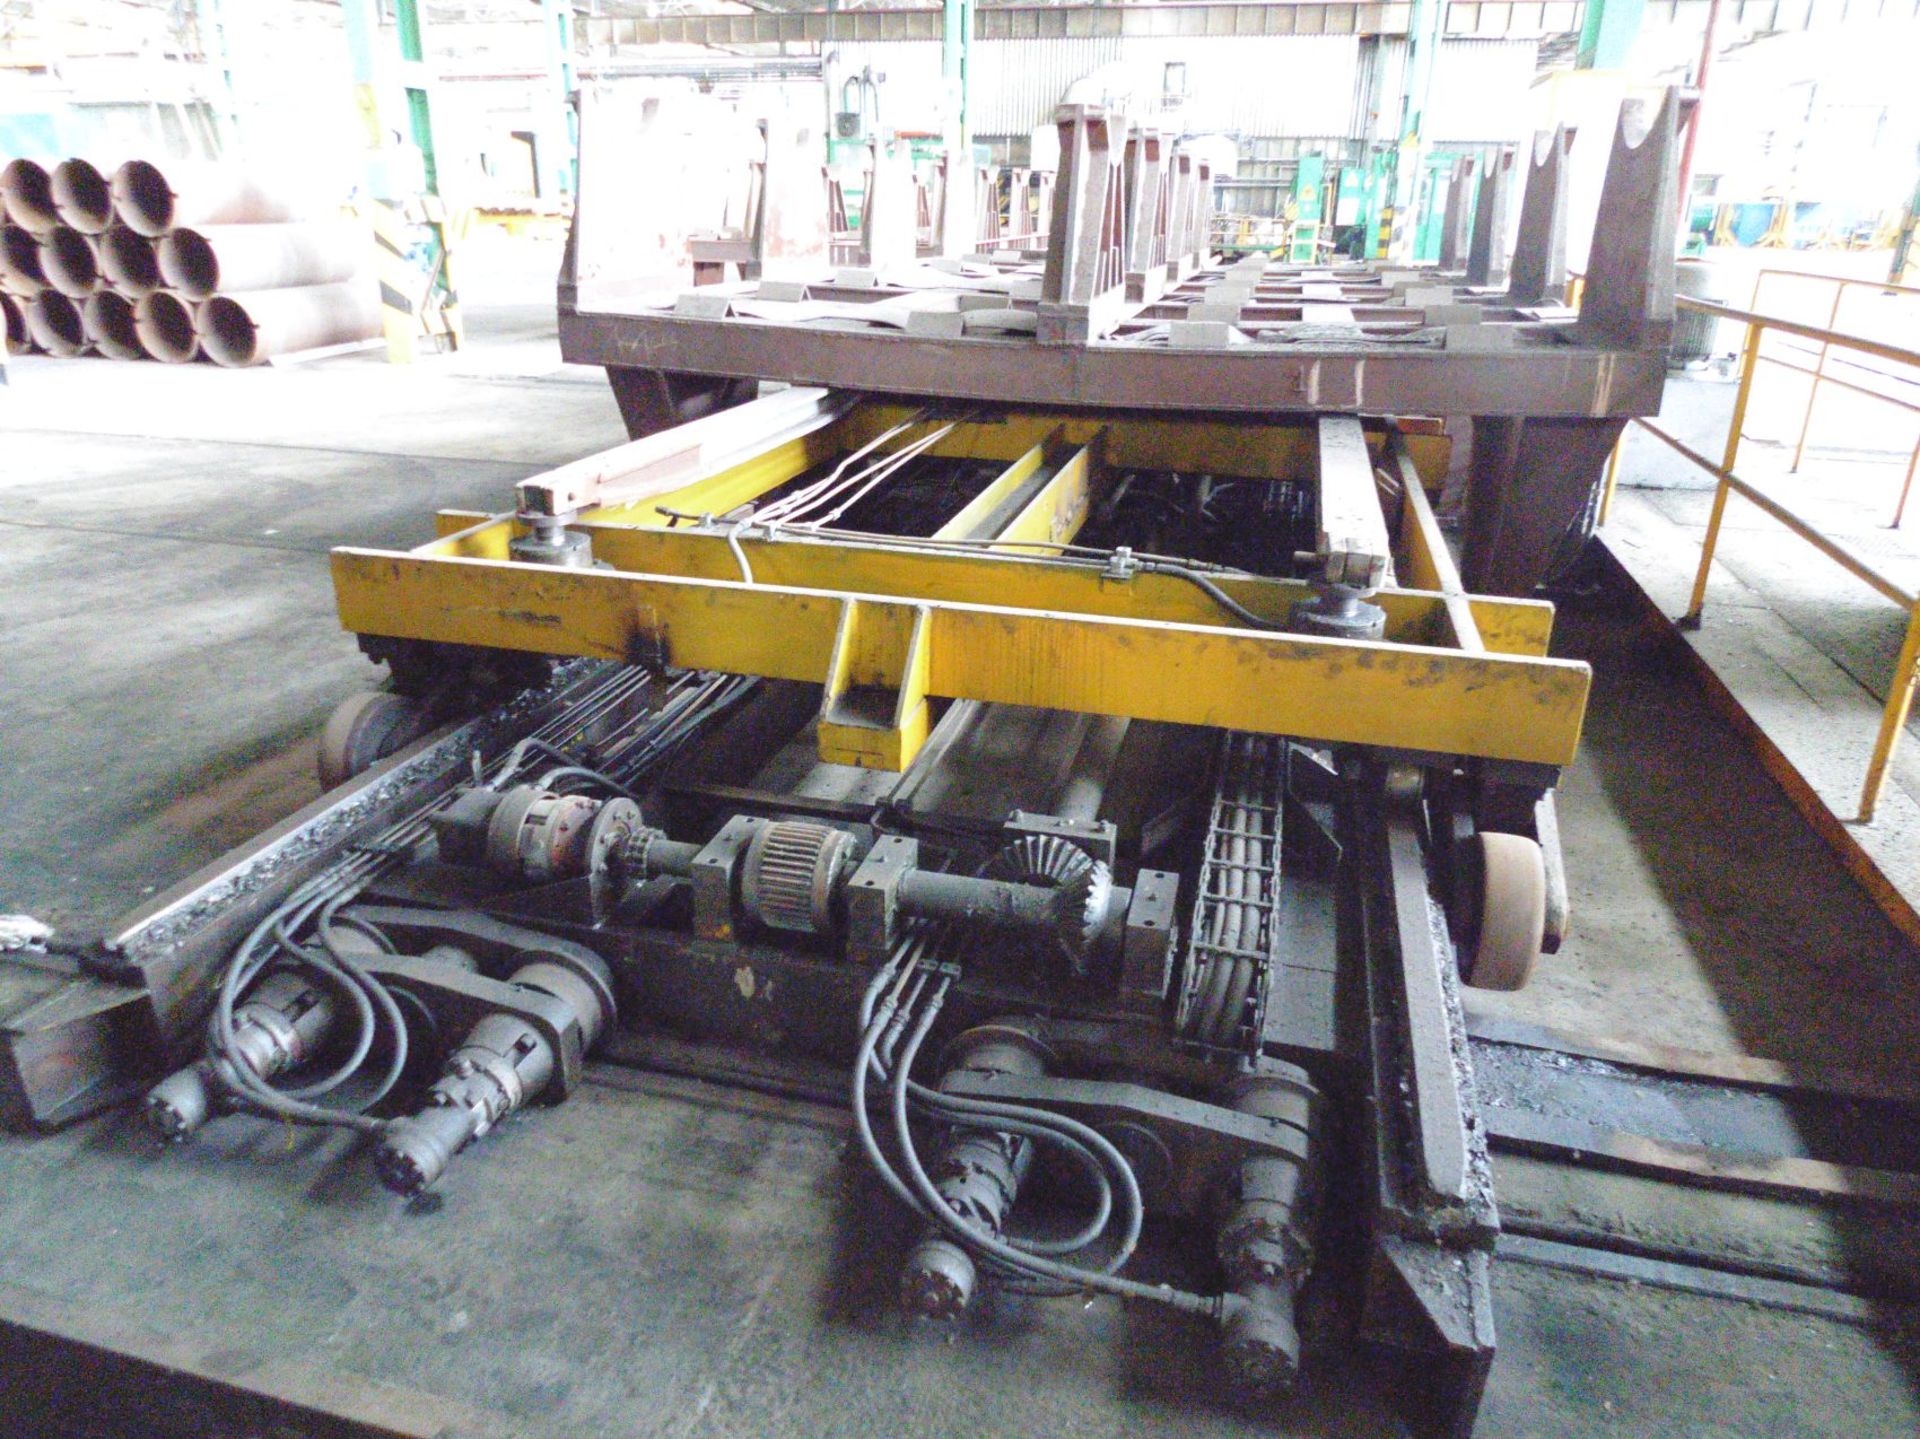 Rail Mounted Furnace Loading Car/Manipulator with 5 x Four - Stand Frames for Coil Loading (used for - Image 2 of 11